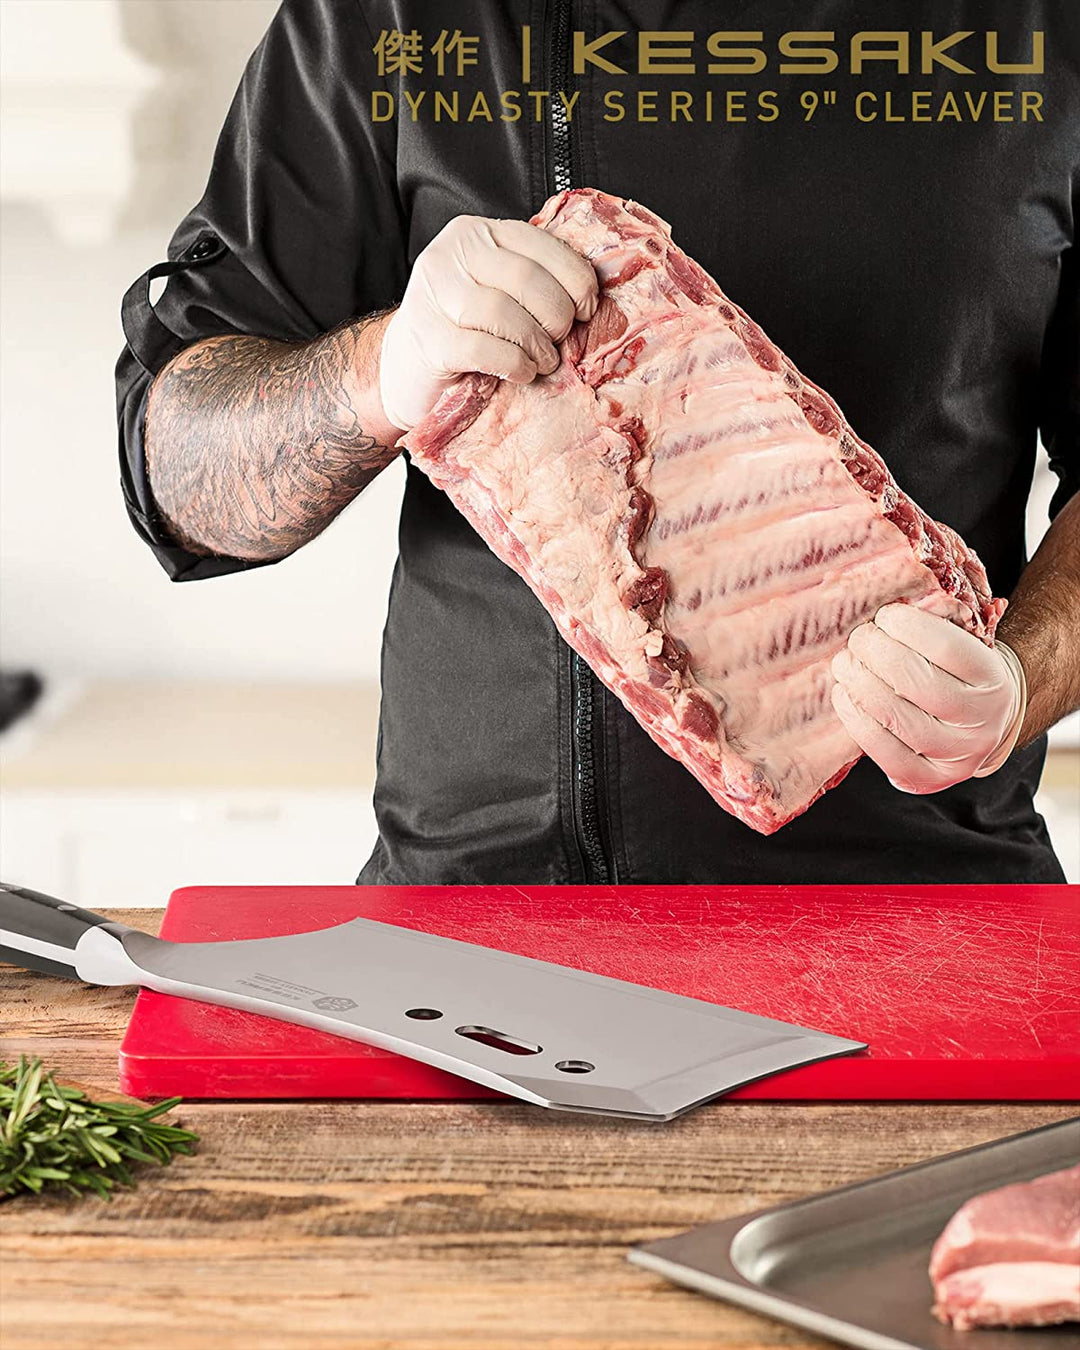 A chef prepares to hack through large ribs with the Dynasty Annihilator Knife